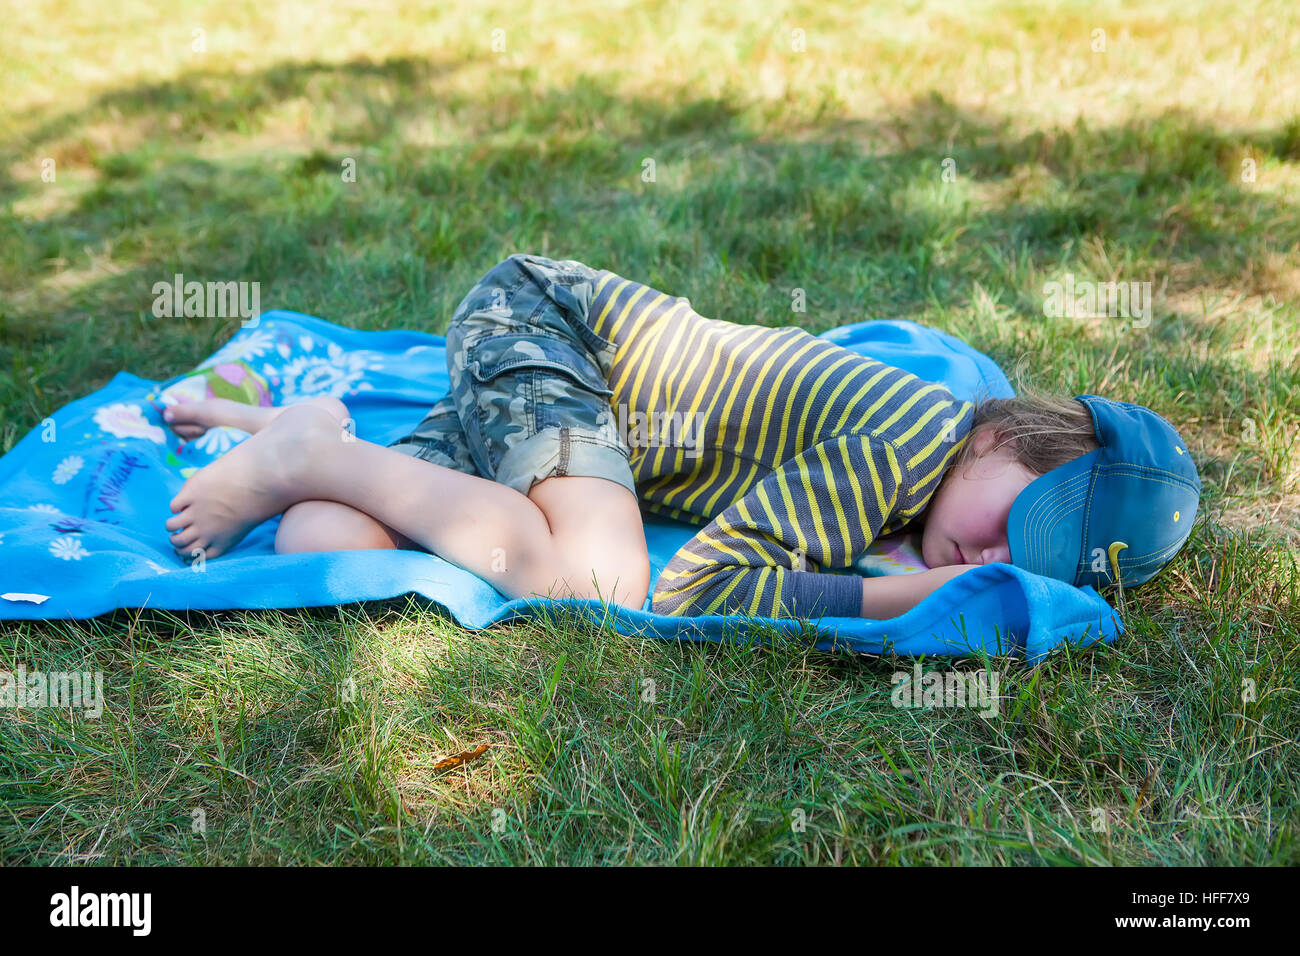 Child sleeping on a blue blanket on grassy ground at a campground in Vermont, USA. Stock Photo